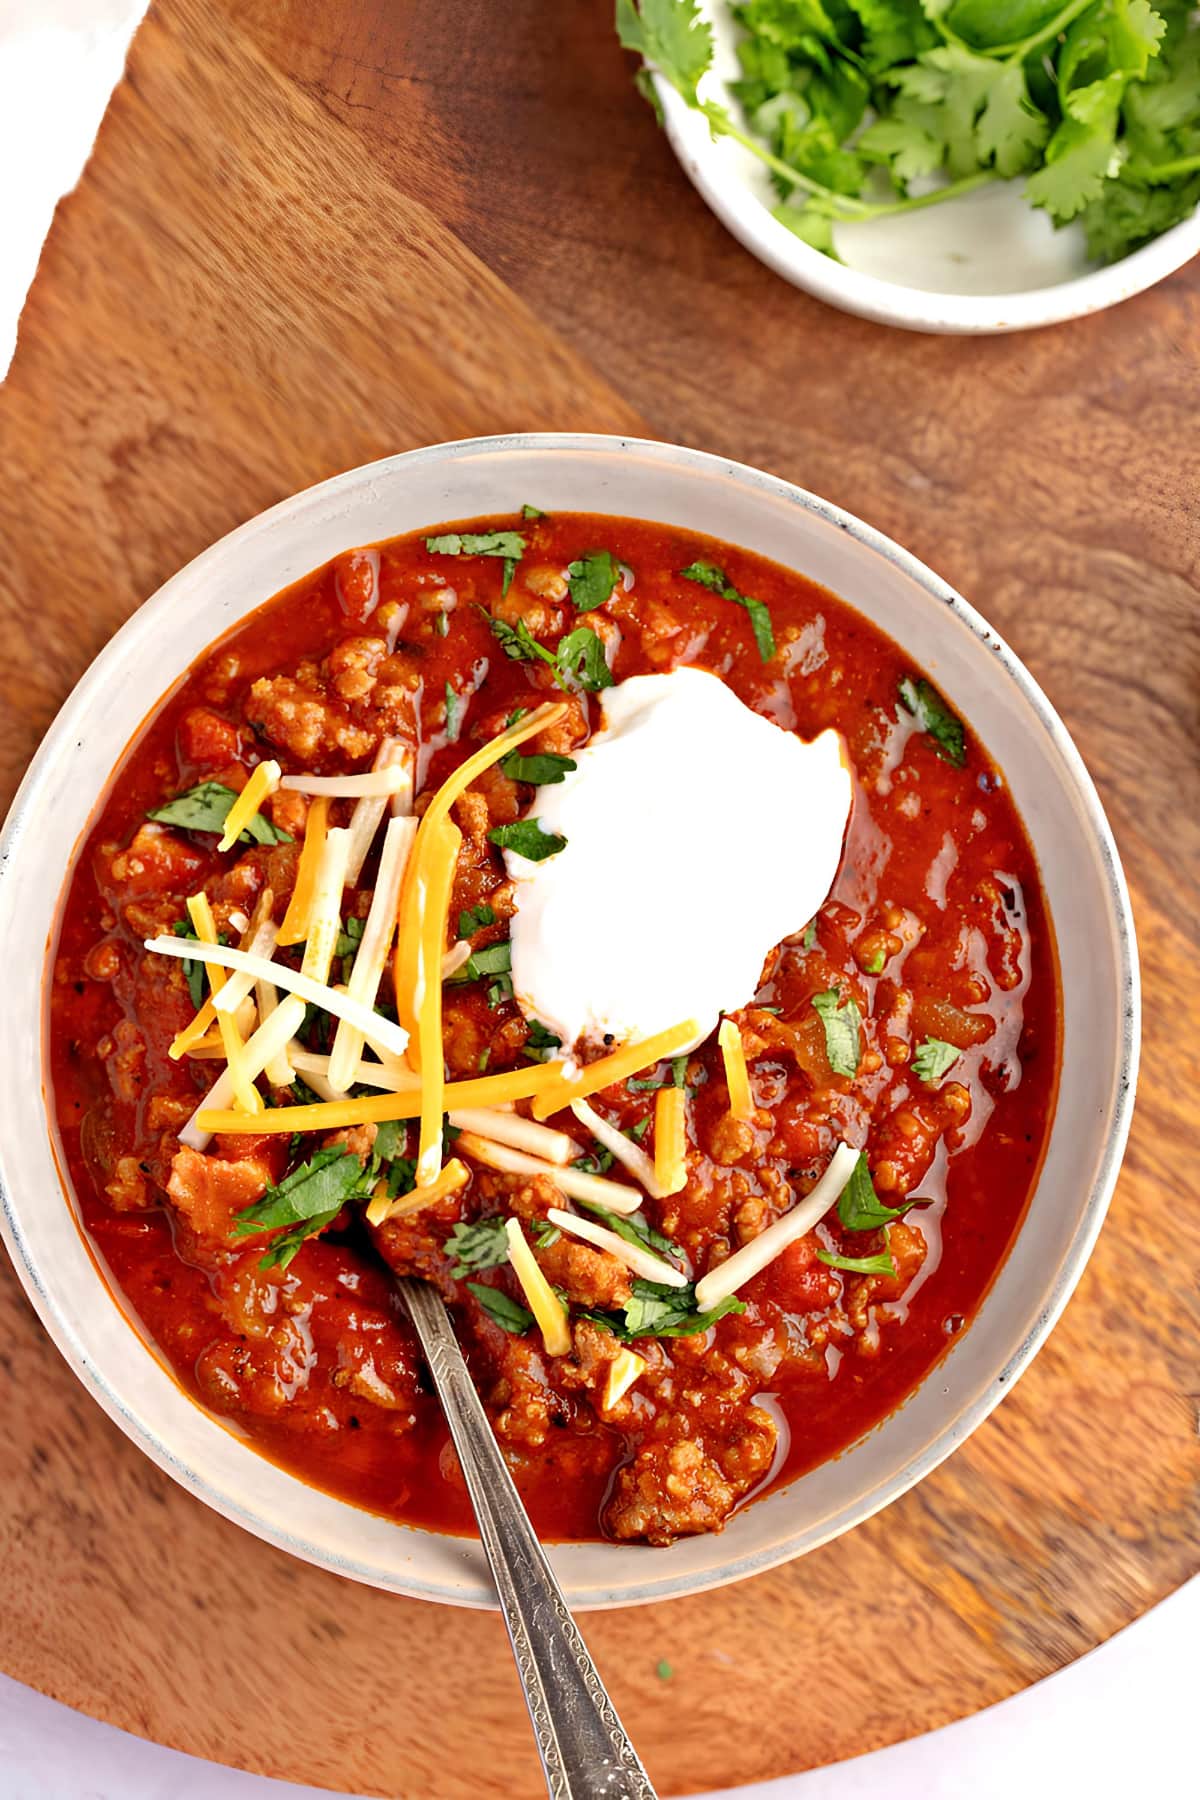 Homemade Chipotle Chili with Cheese, Sour Cream and Cheese